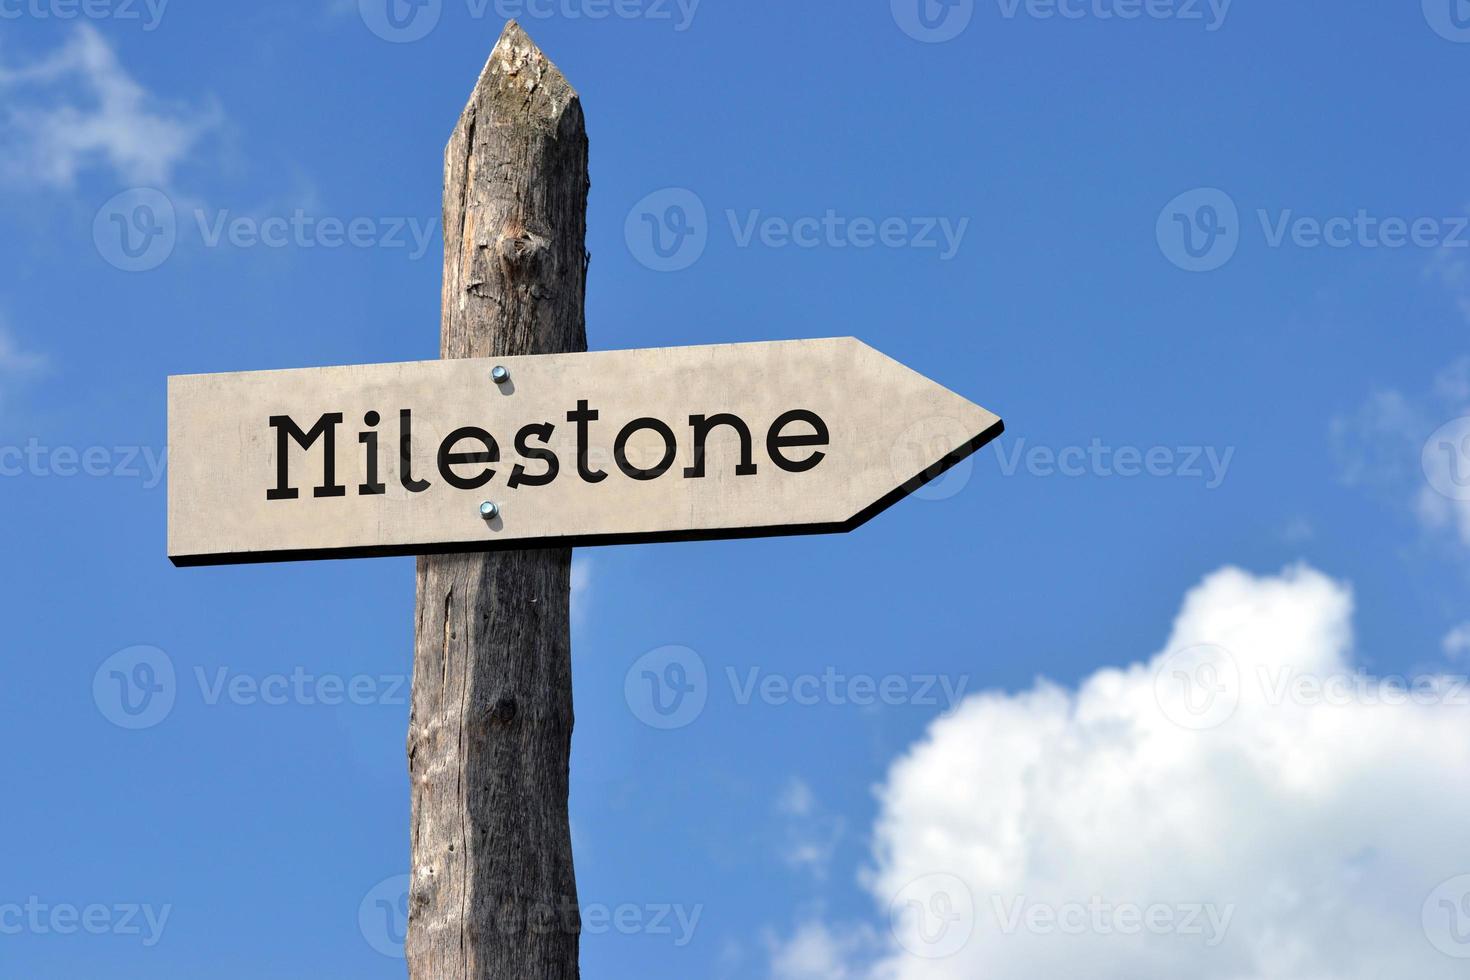 Milestone - Wooden Signpost with one Arrow, Sky with Clouds photo